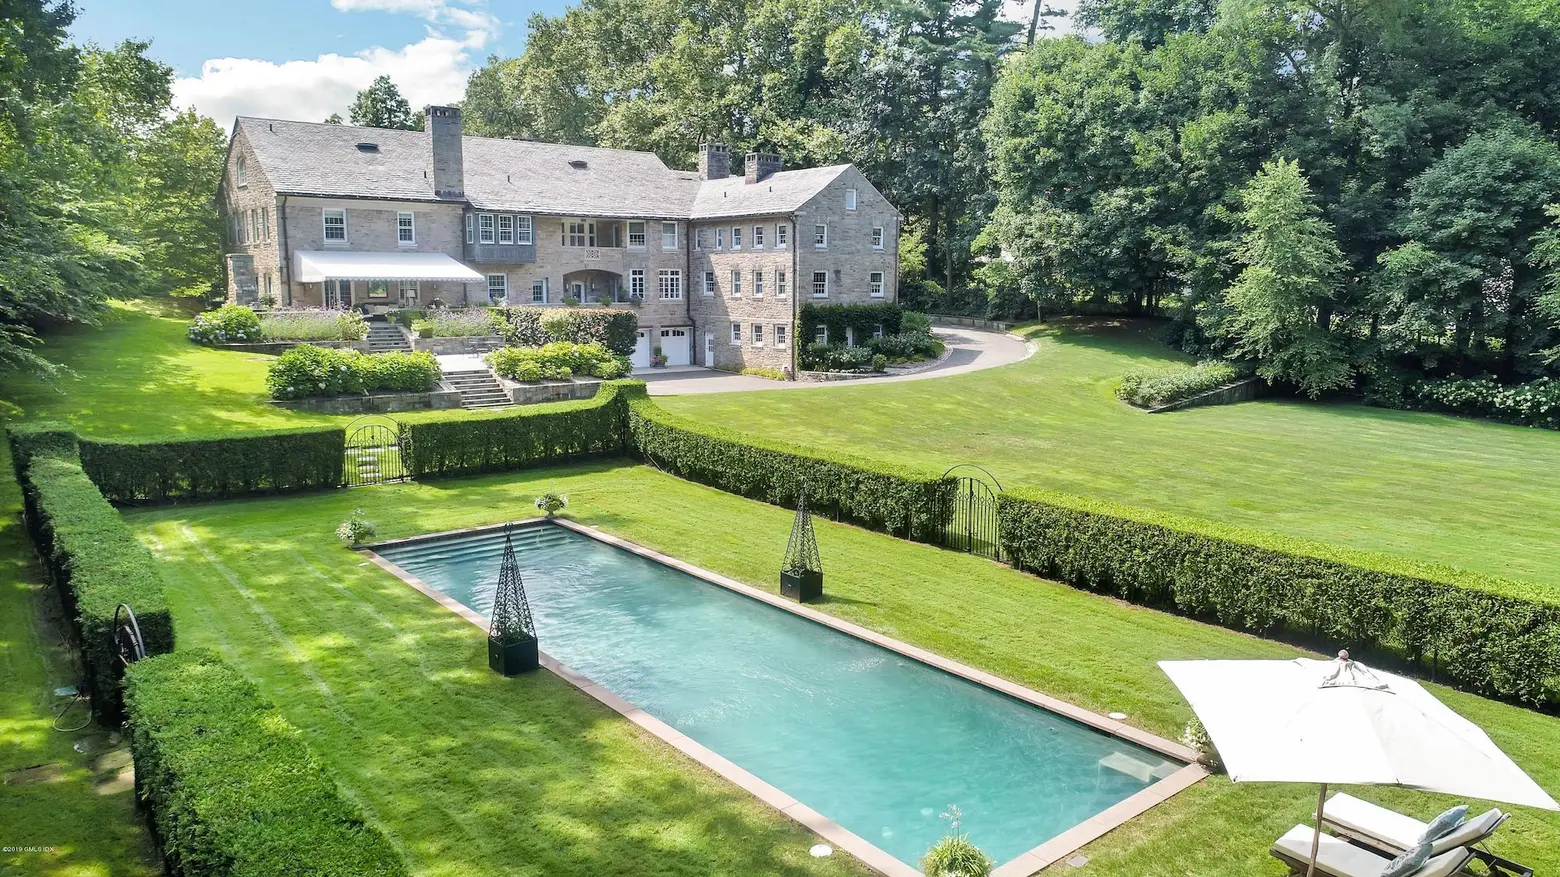 Historic Connecticut estate built by the man behind the Empire State Building lists for $8.3M